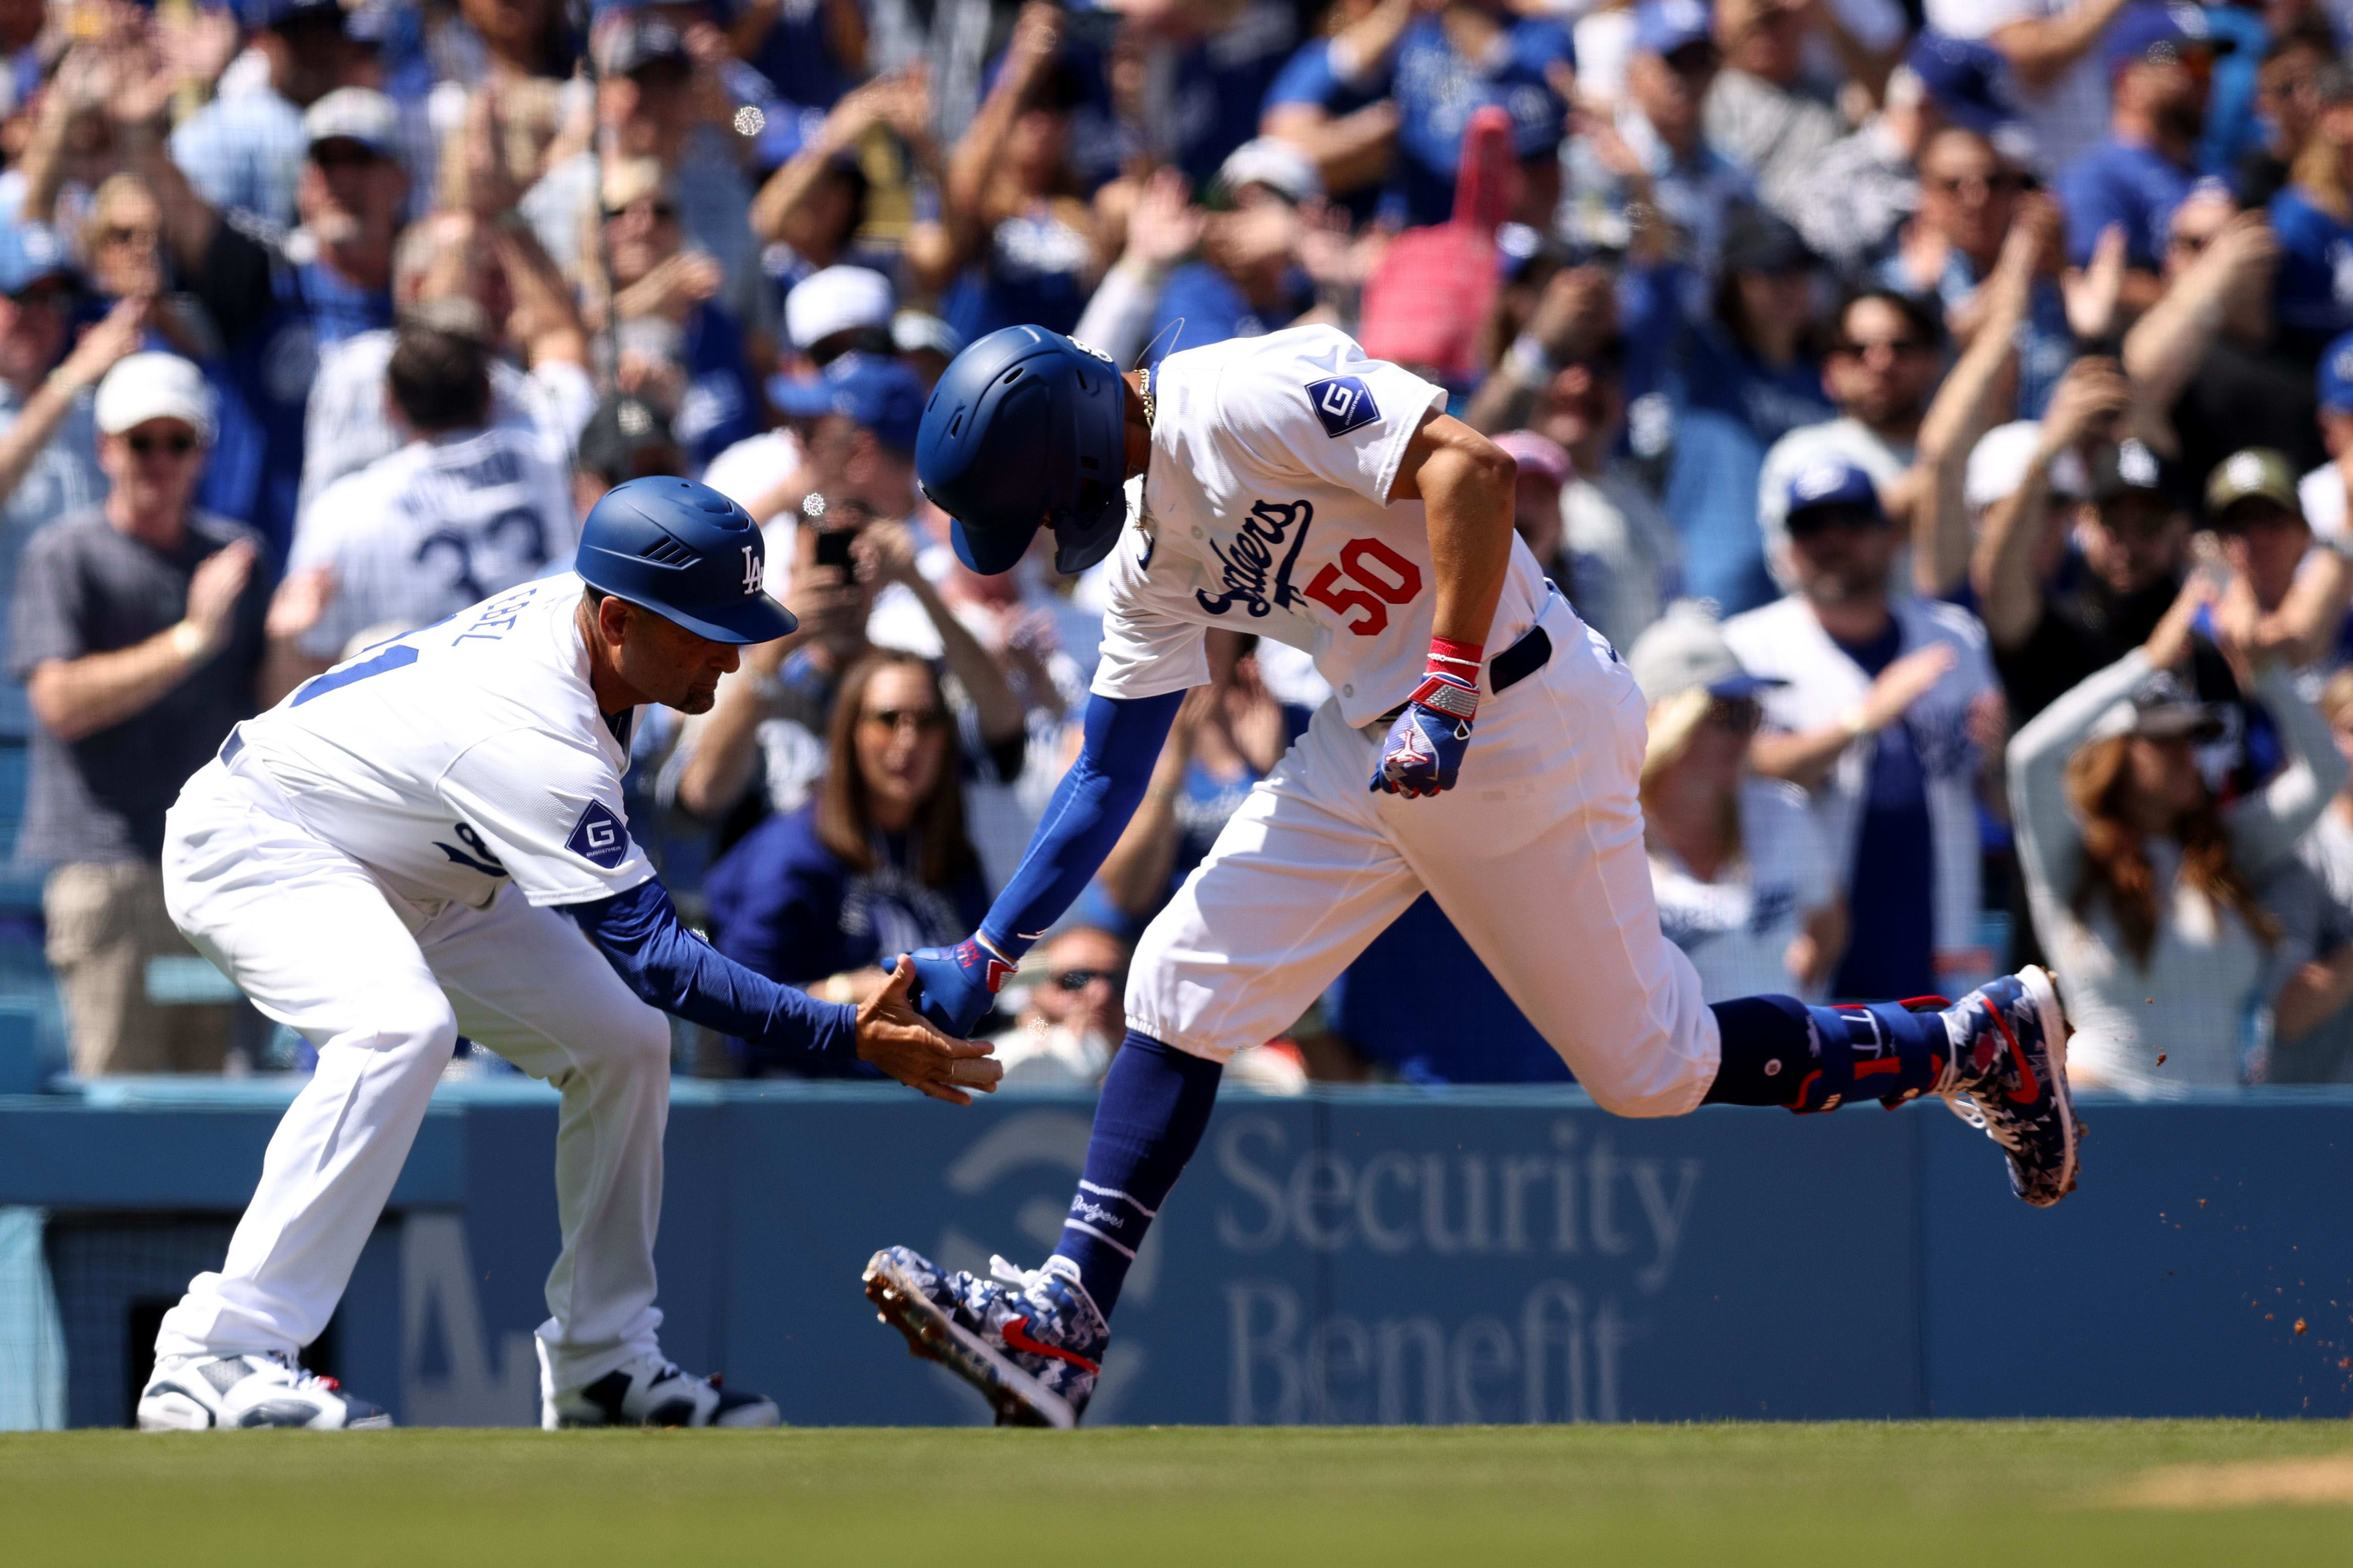 Los Angeles Dodgers outfielder Mookie Betts hits a home run.